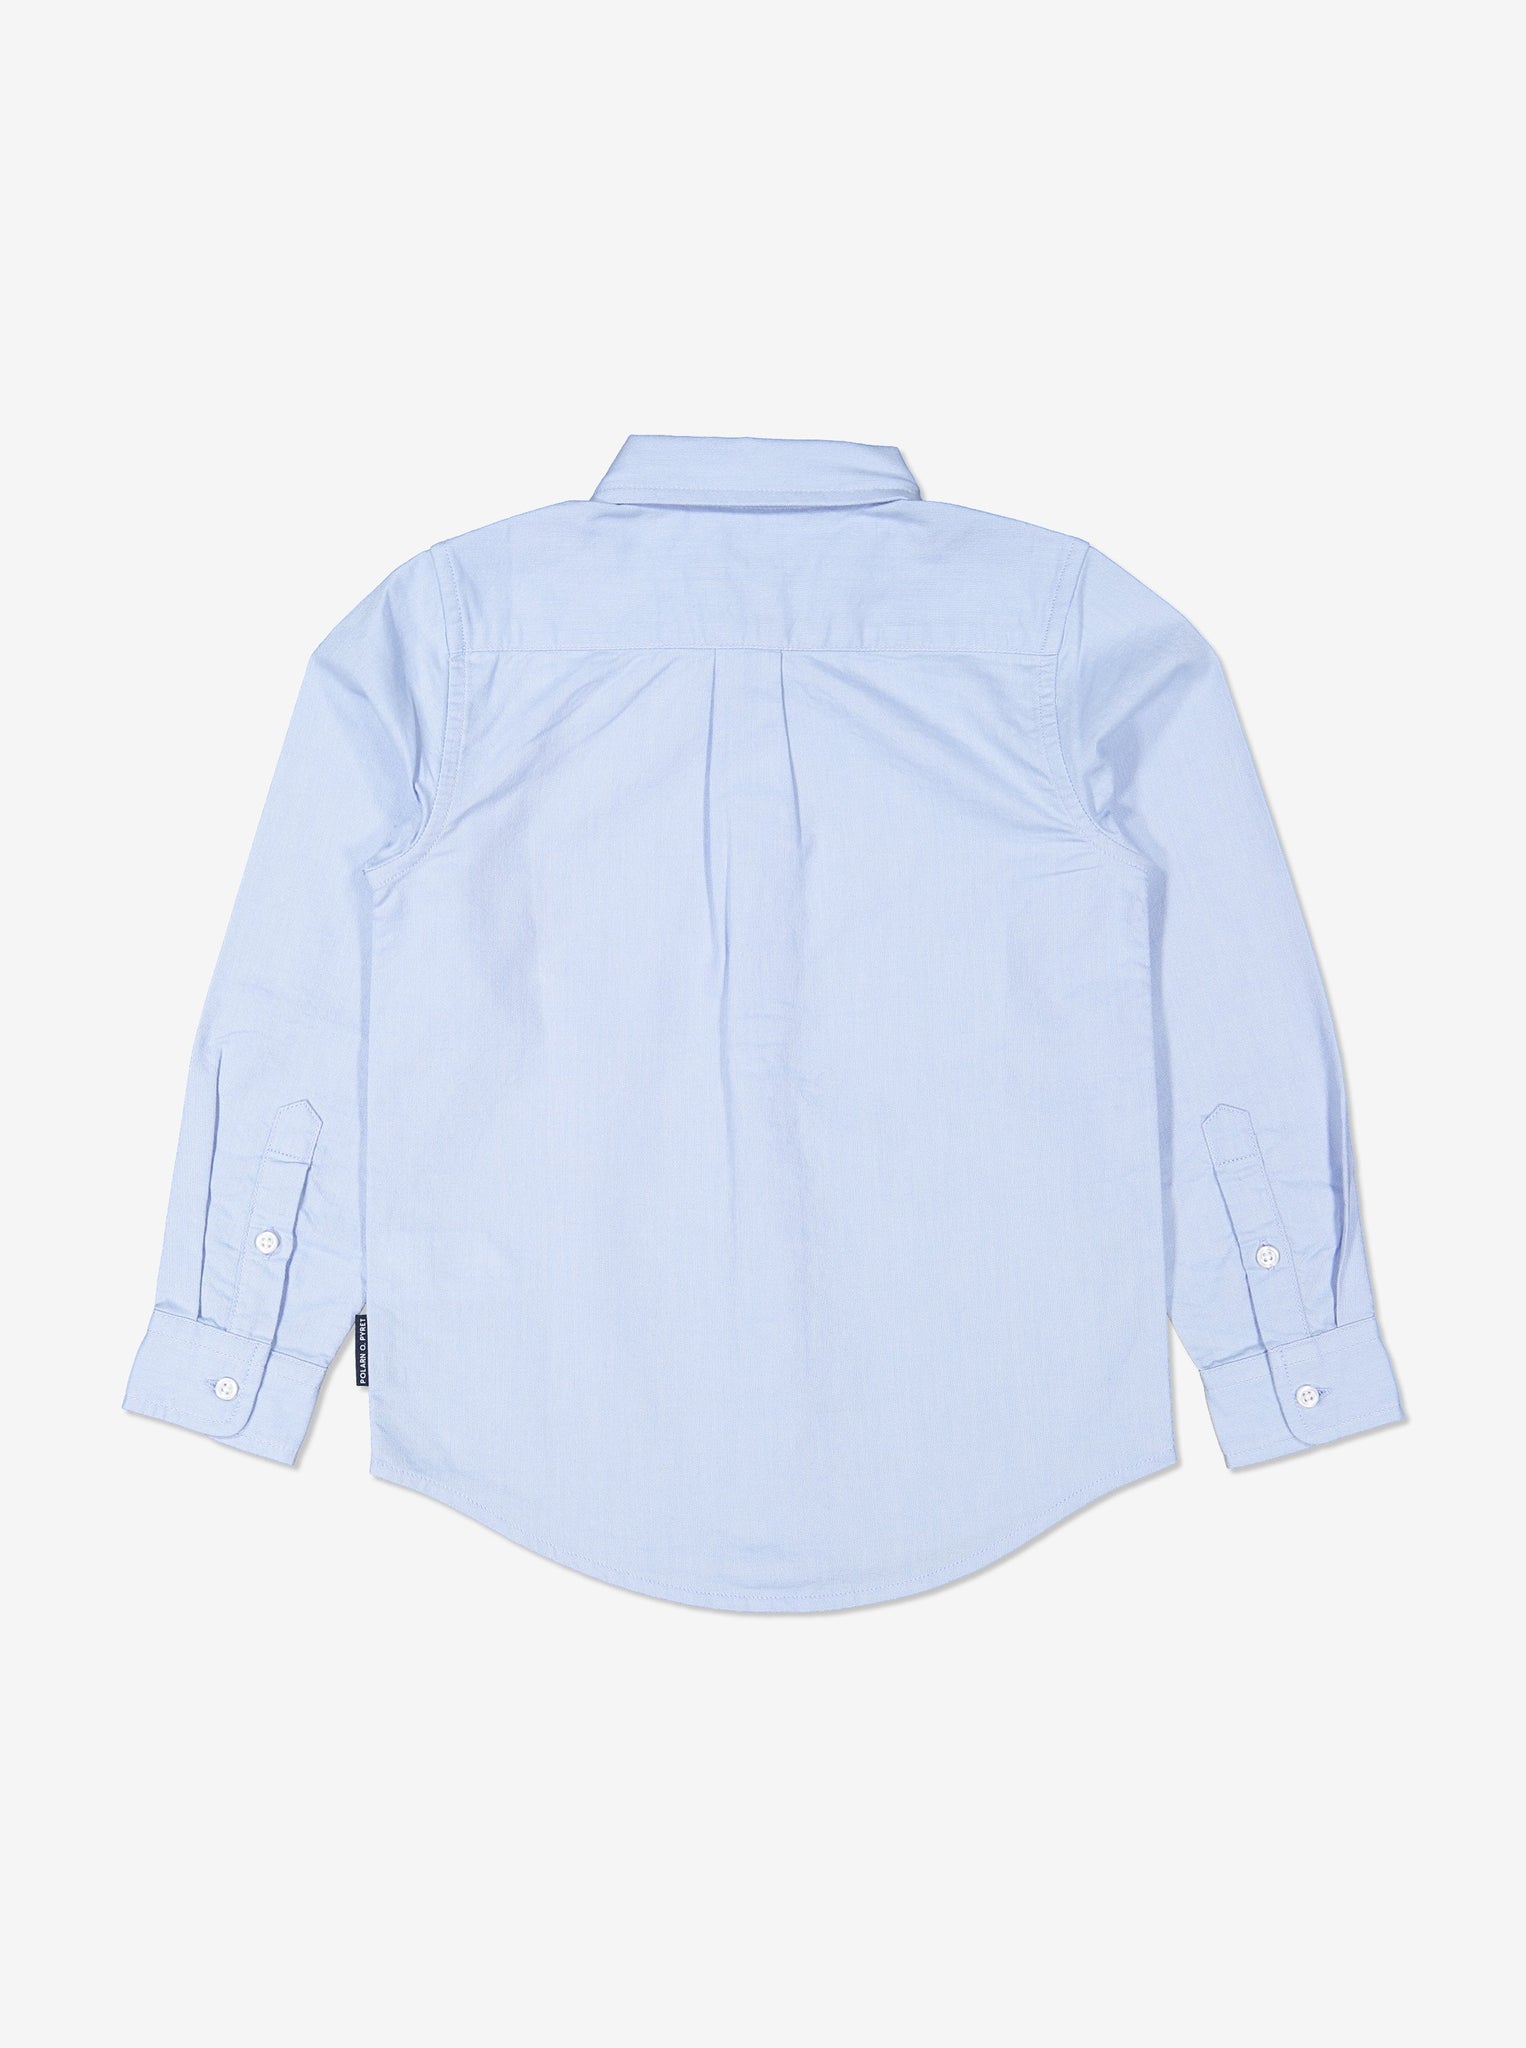 Boy Blue Kids Oxford Shirt, organic cotton comfortable and easy to wash, polarn o. pyret quality 